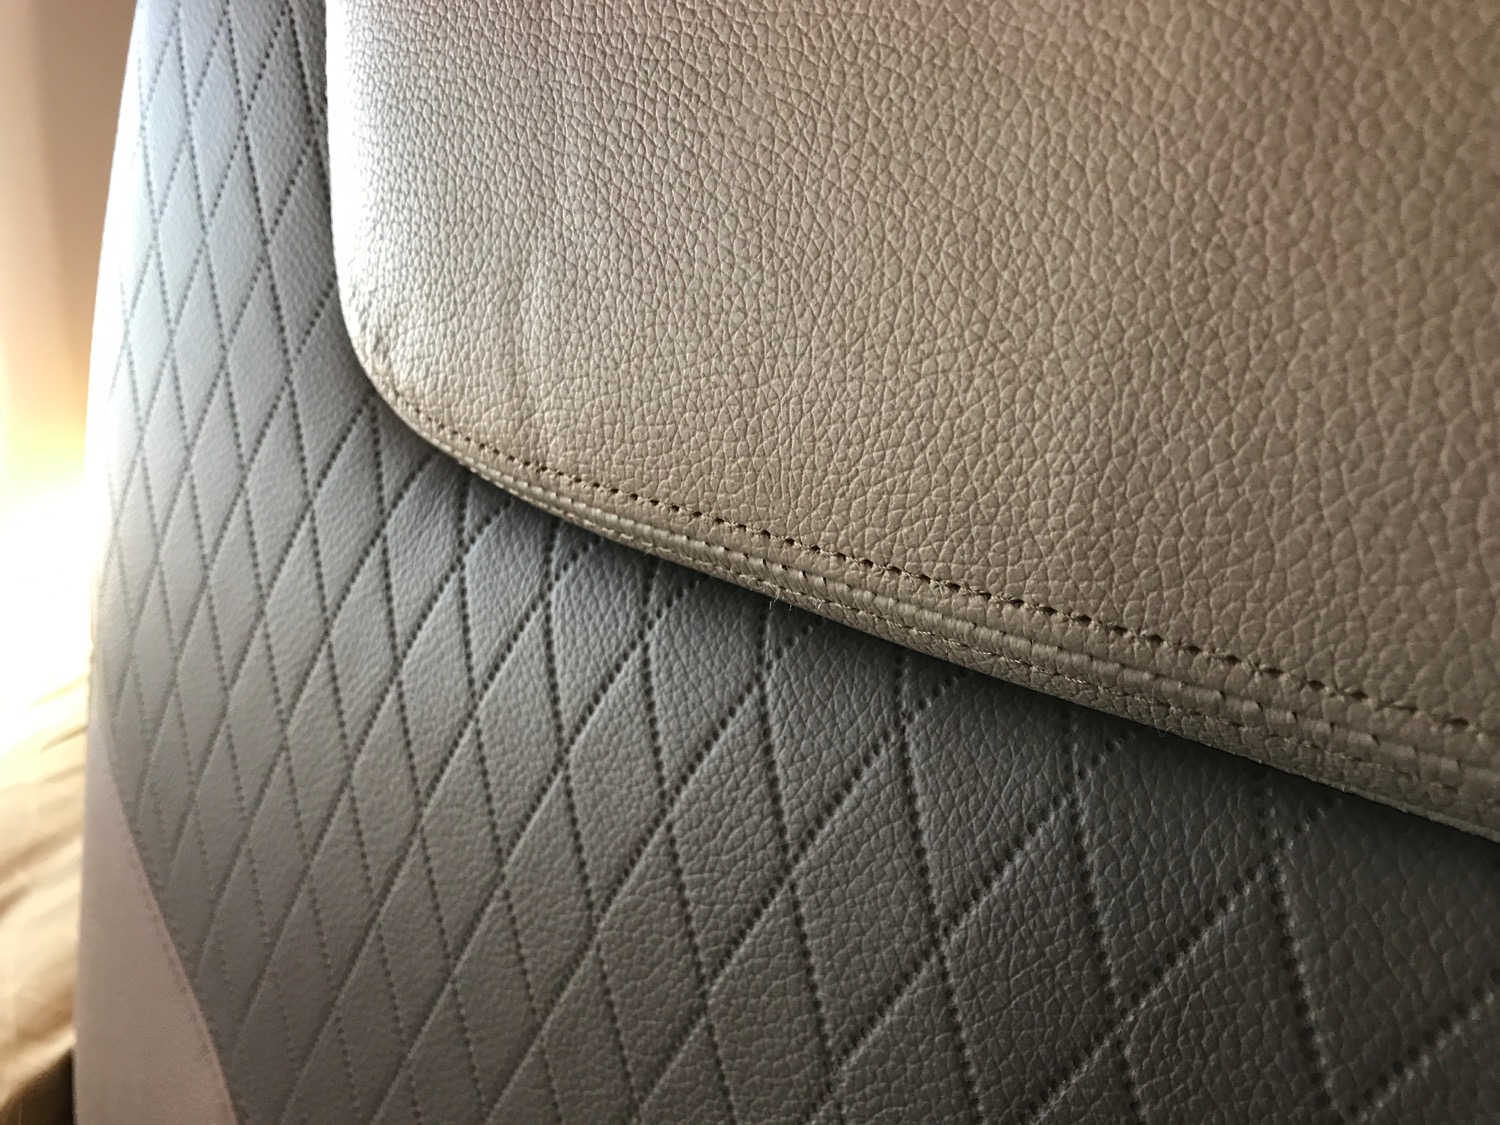 a close up of a leather seat